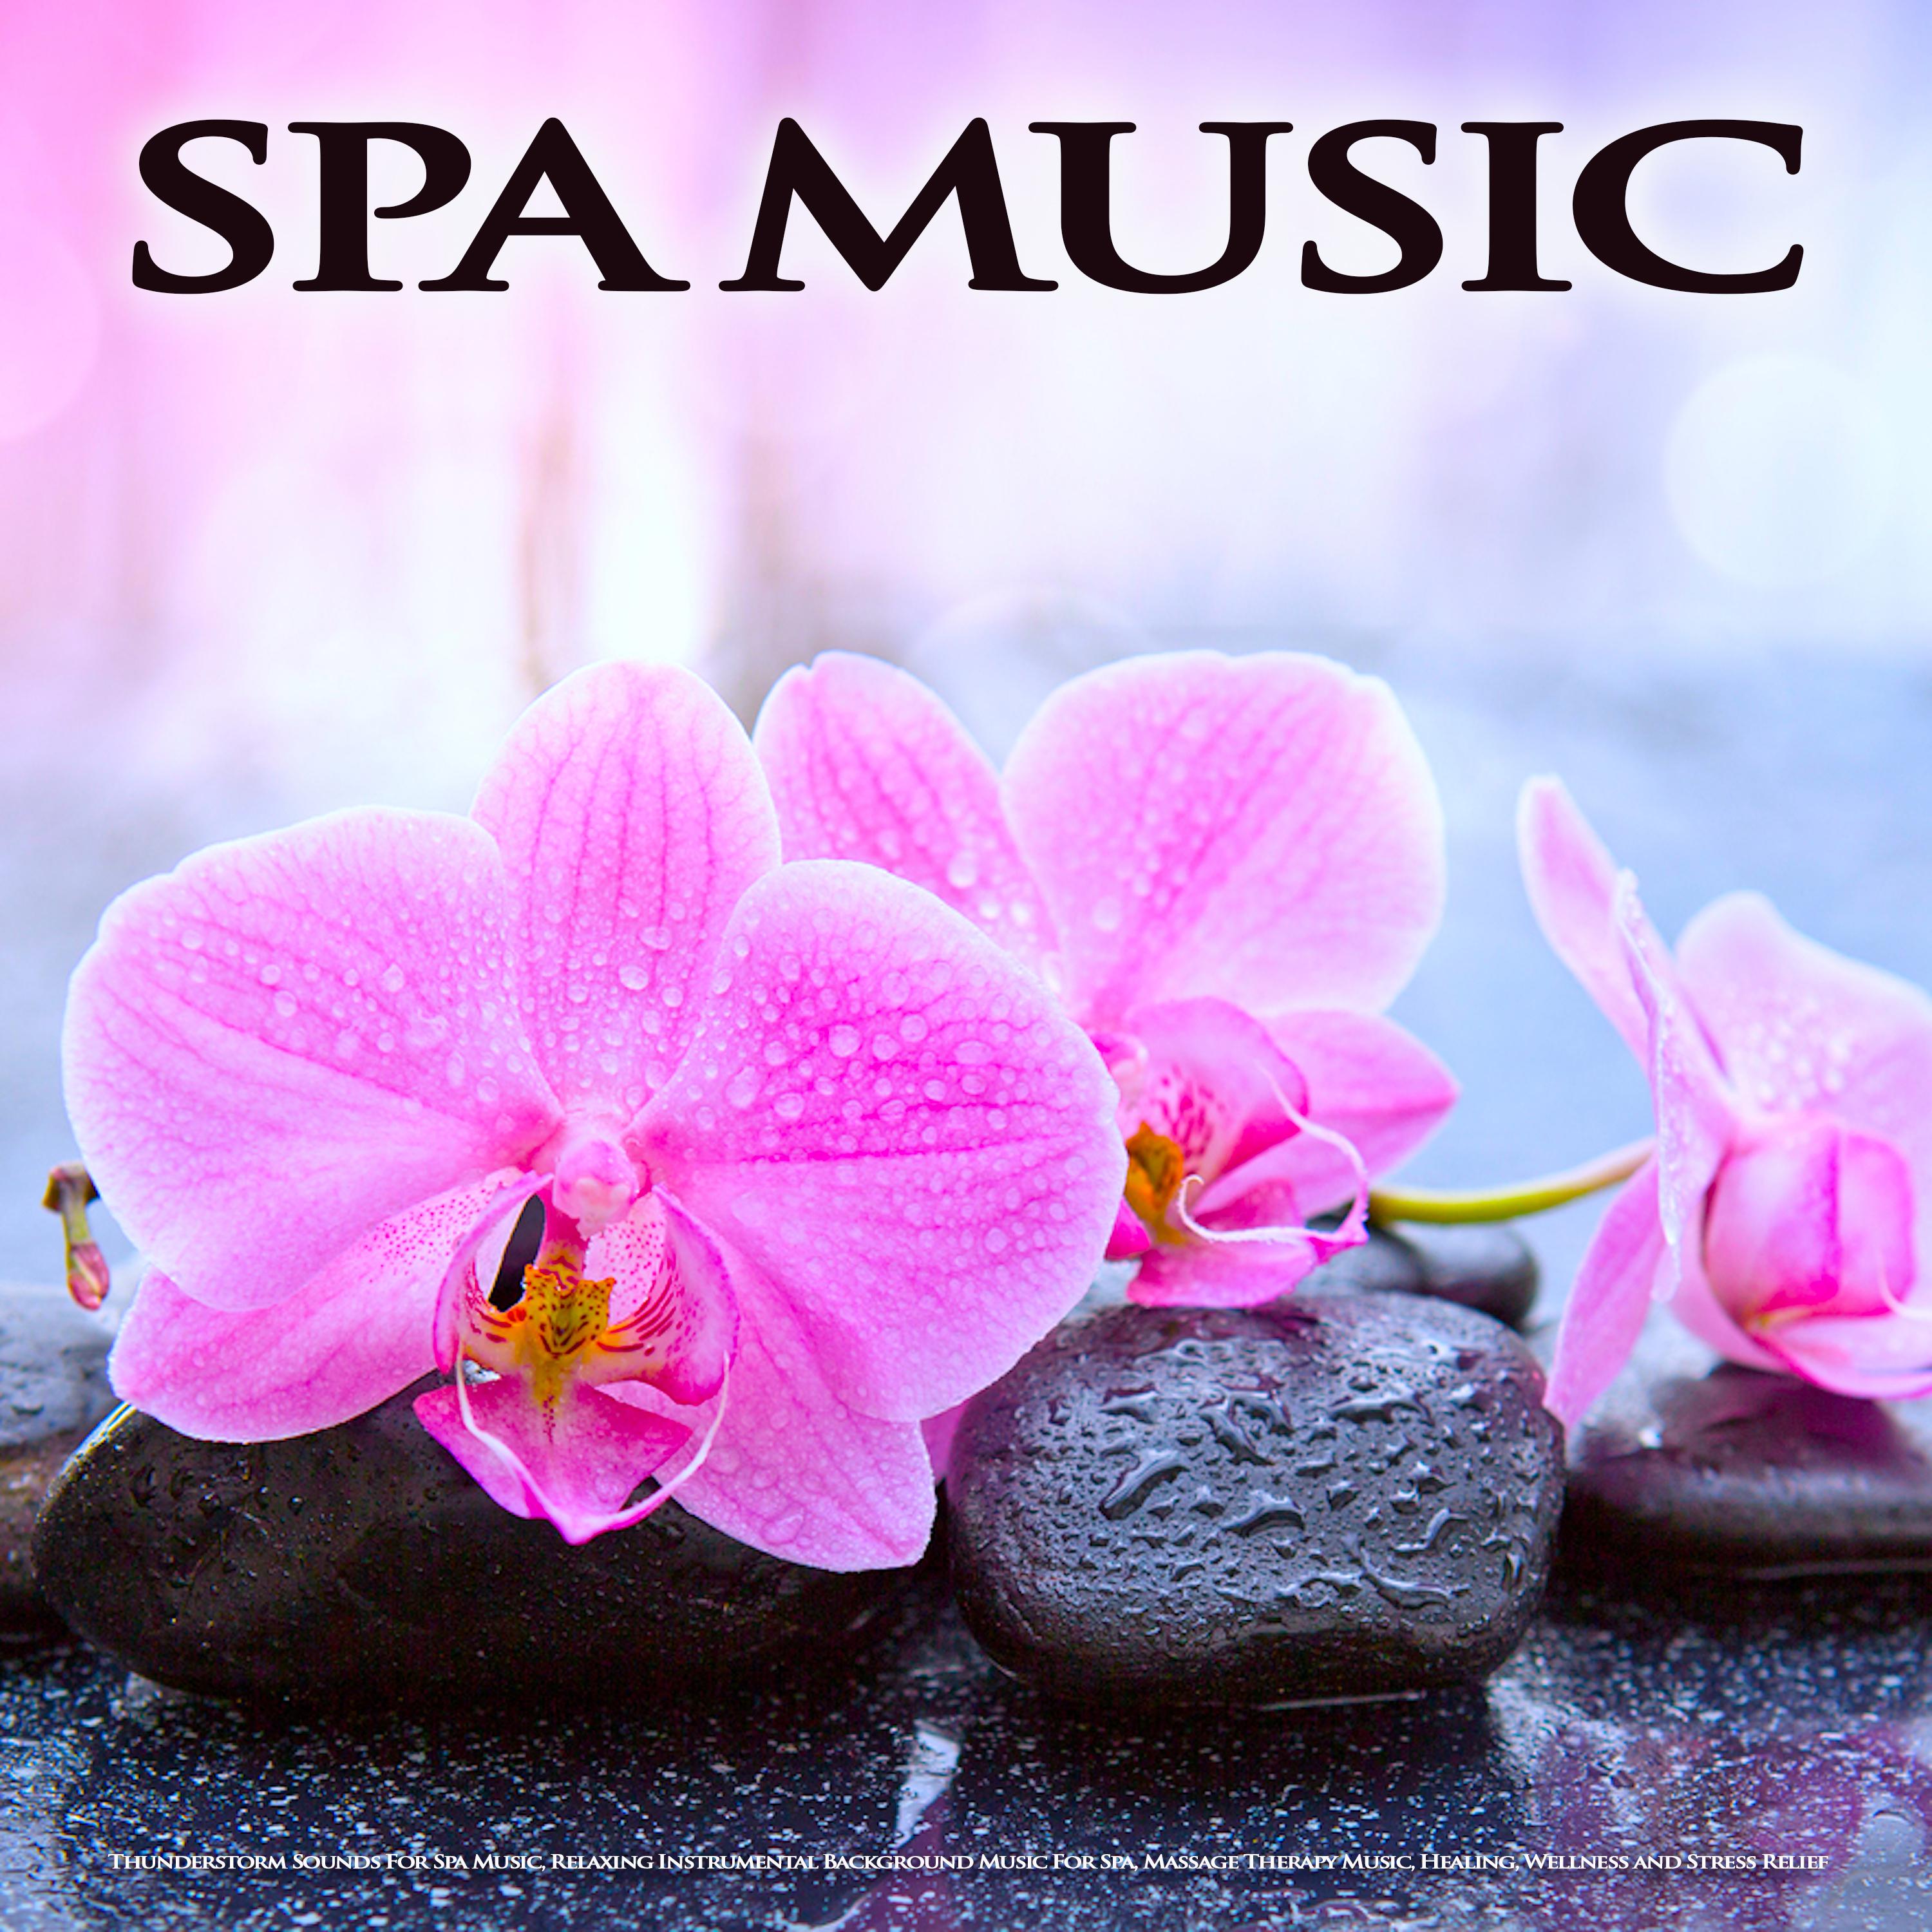 Spa Music: Thunderstorm Sounds For Spa Music, Relaxing Instrumental Background Music For Spa, Massage Therapy Music, Healing, Wellness and Stress Relief